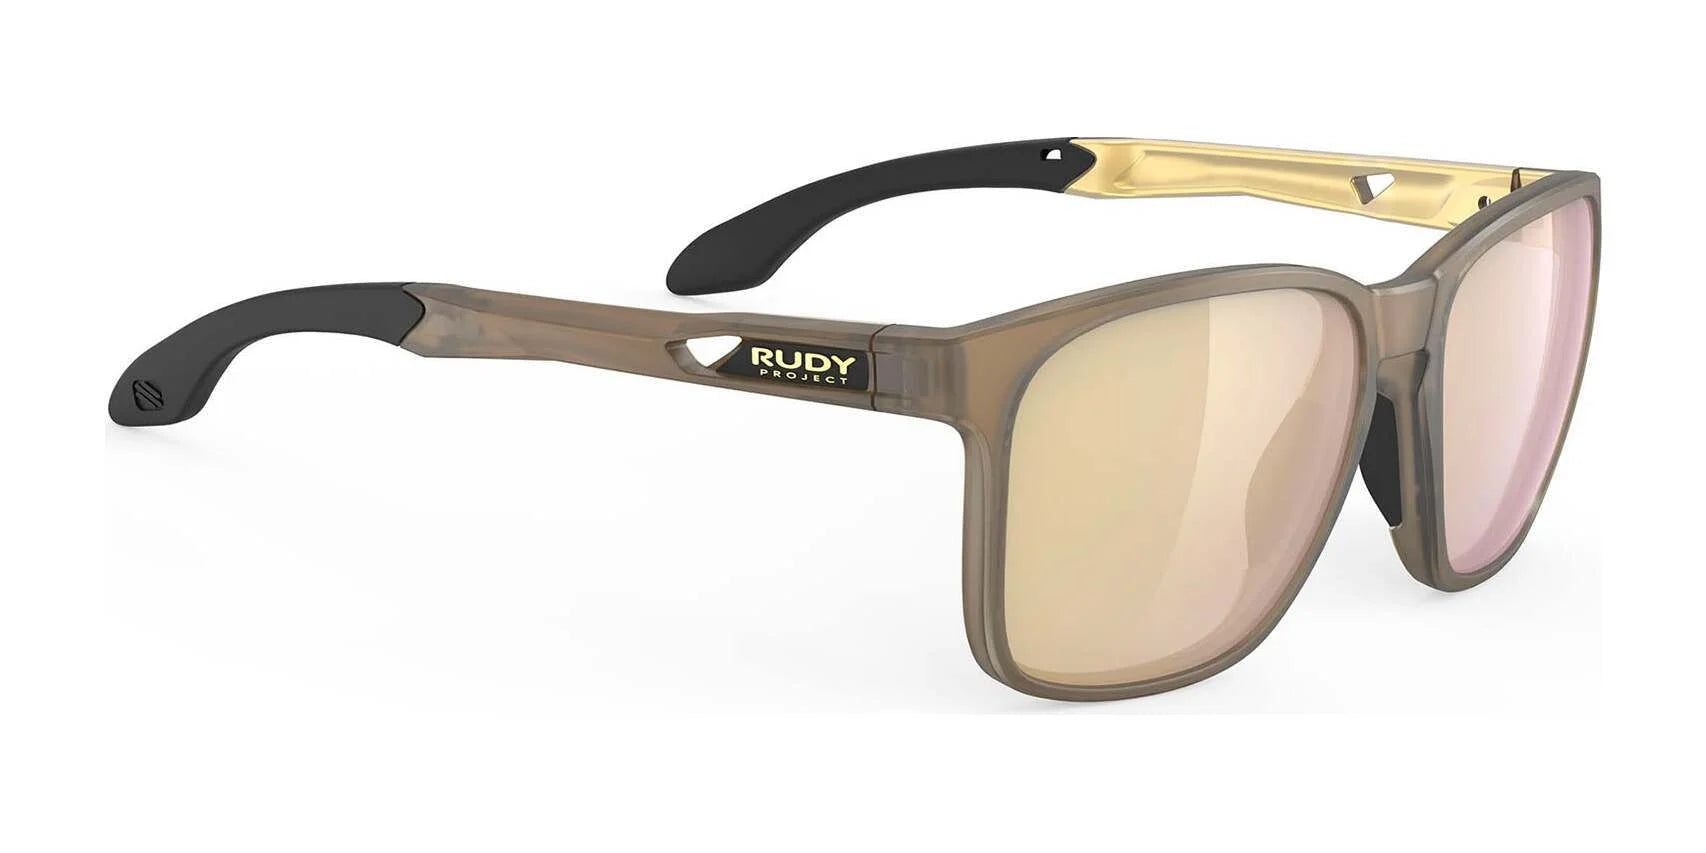 Rudy Project Lightflow A Sunglasses Multilaser Gold / Ice Gold Matte